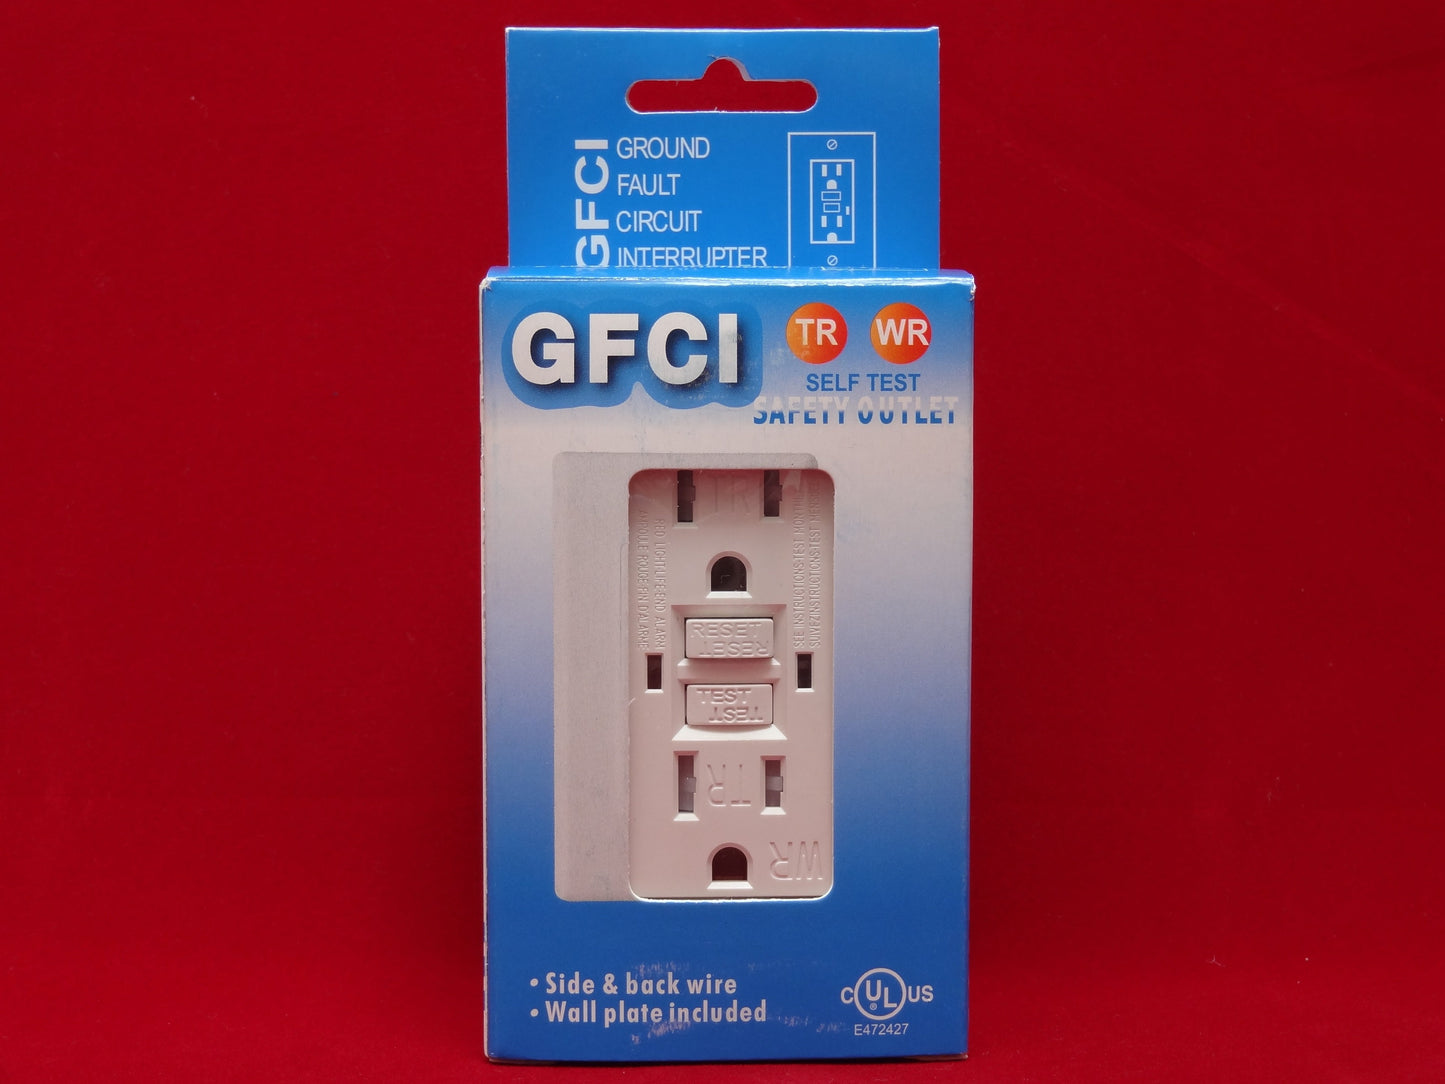 Outdoor GFCI Outlet: Canada 15amp 10pack Weather Resistant Receptacle WR TR - Led Light Canada